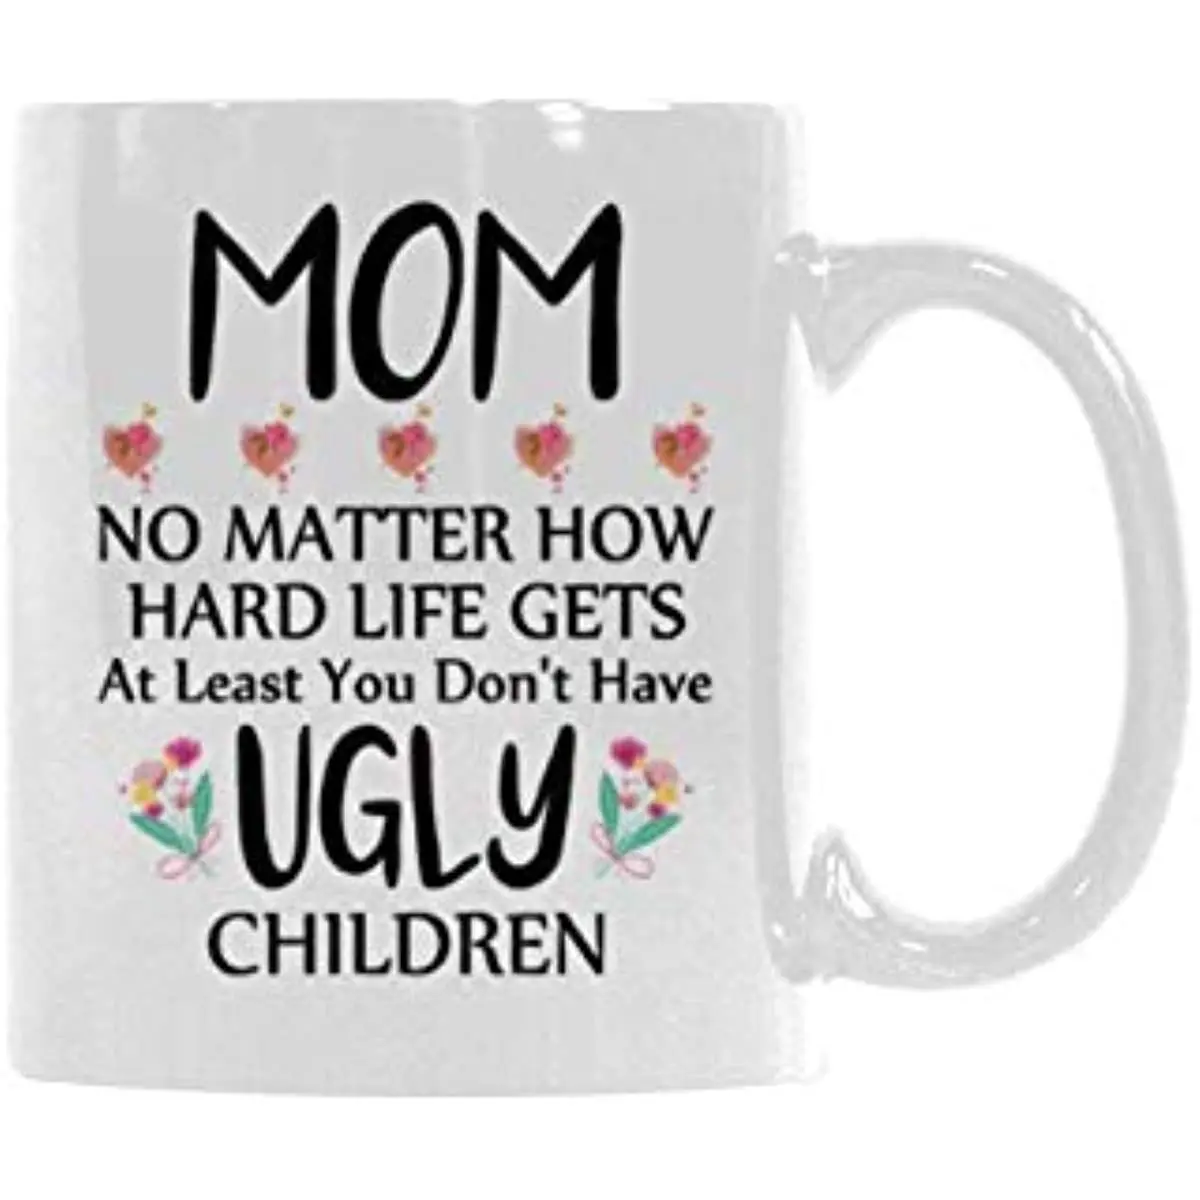 

Funny MOM No Matter How Hard Life Gets At Least You Don't Have Ugly Children Ceramic Coffee Cup Gift Mug Office Tea Cups